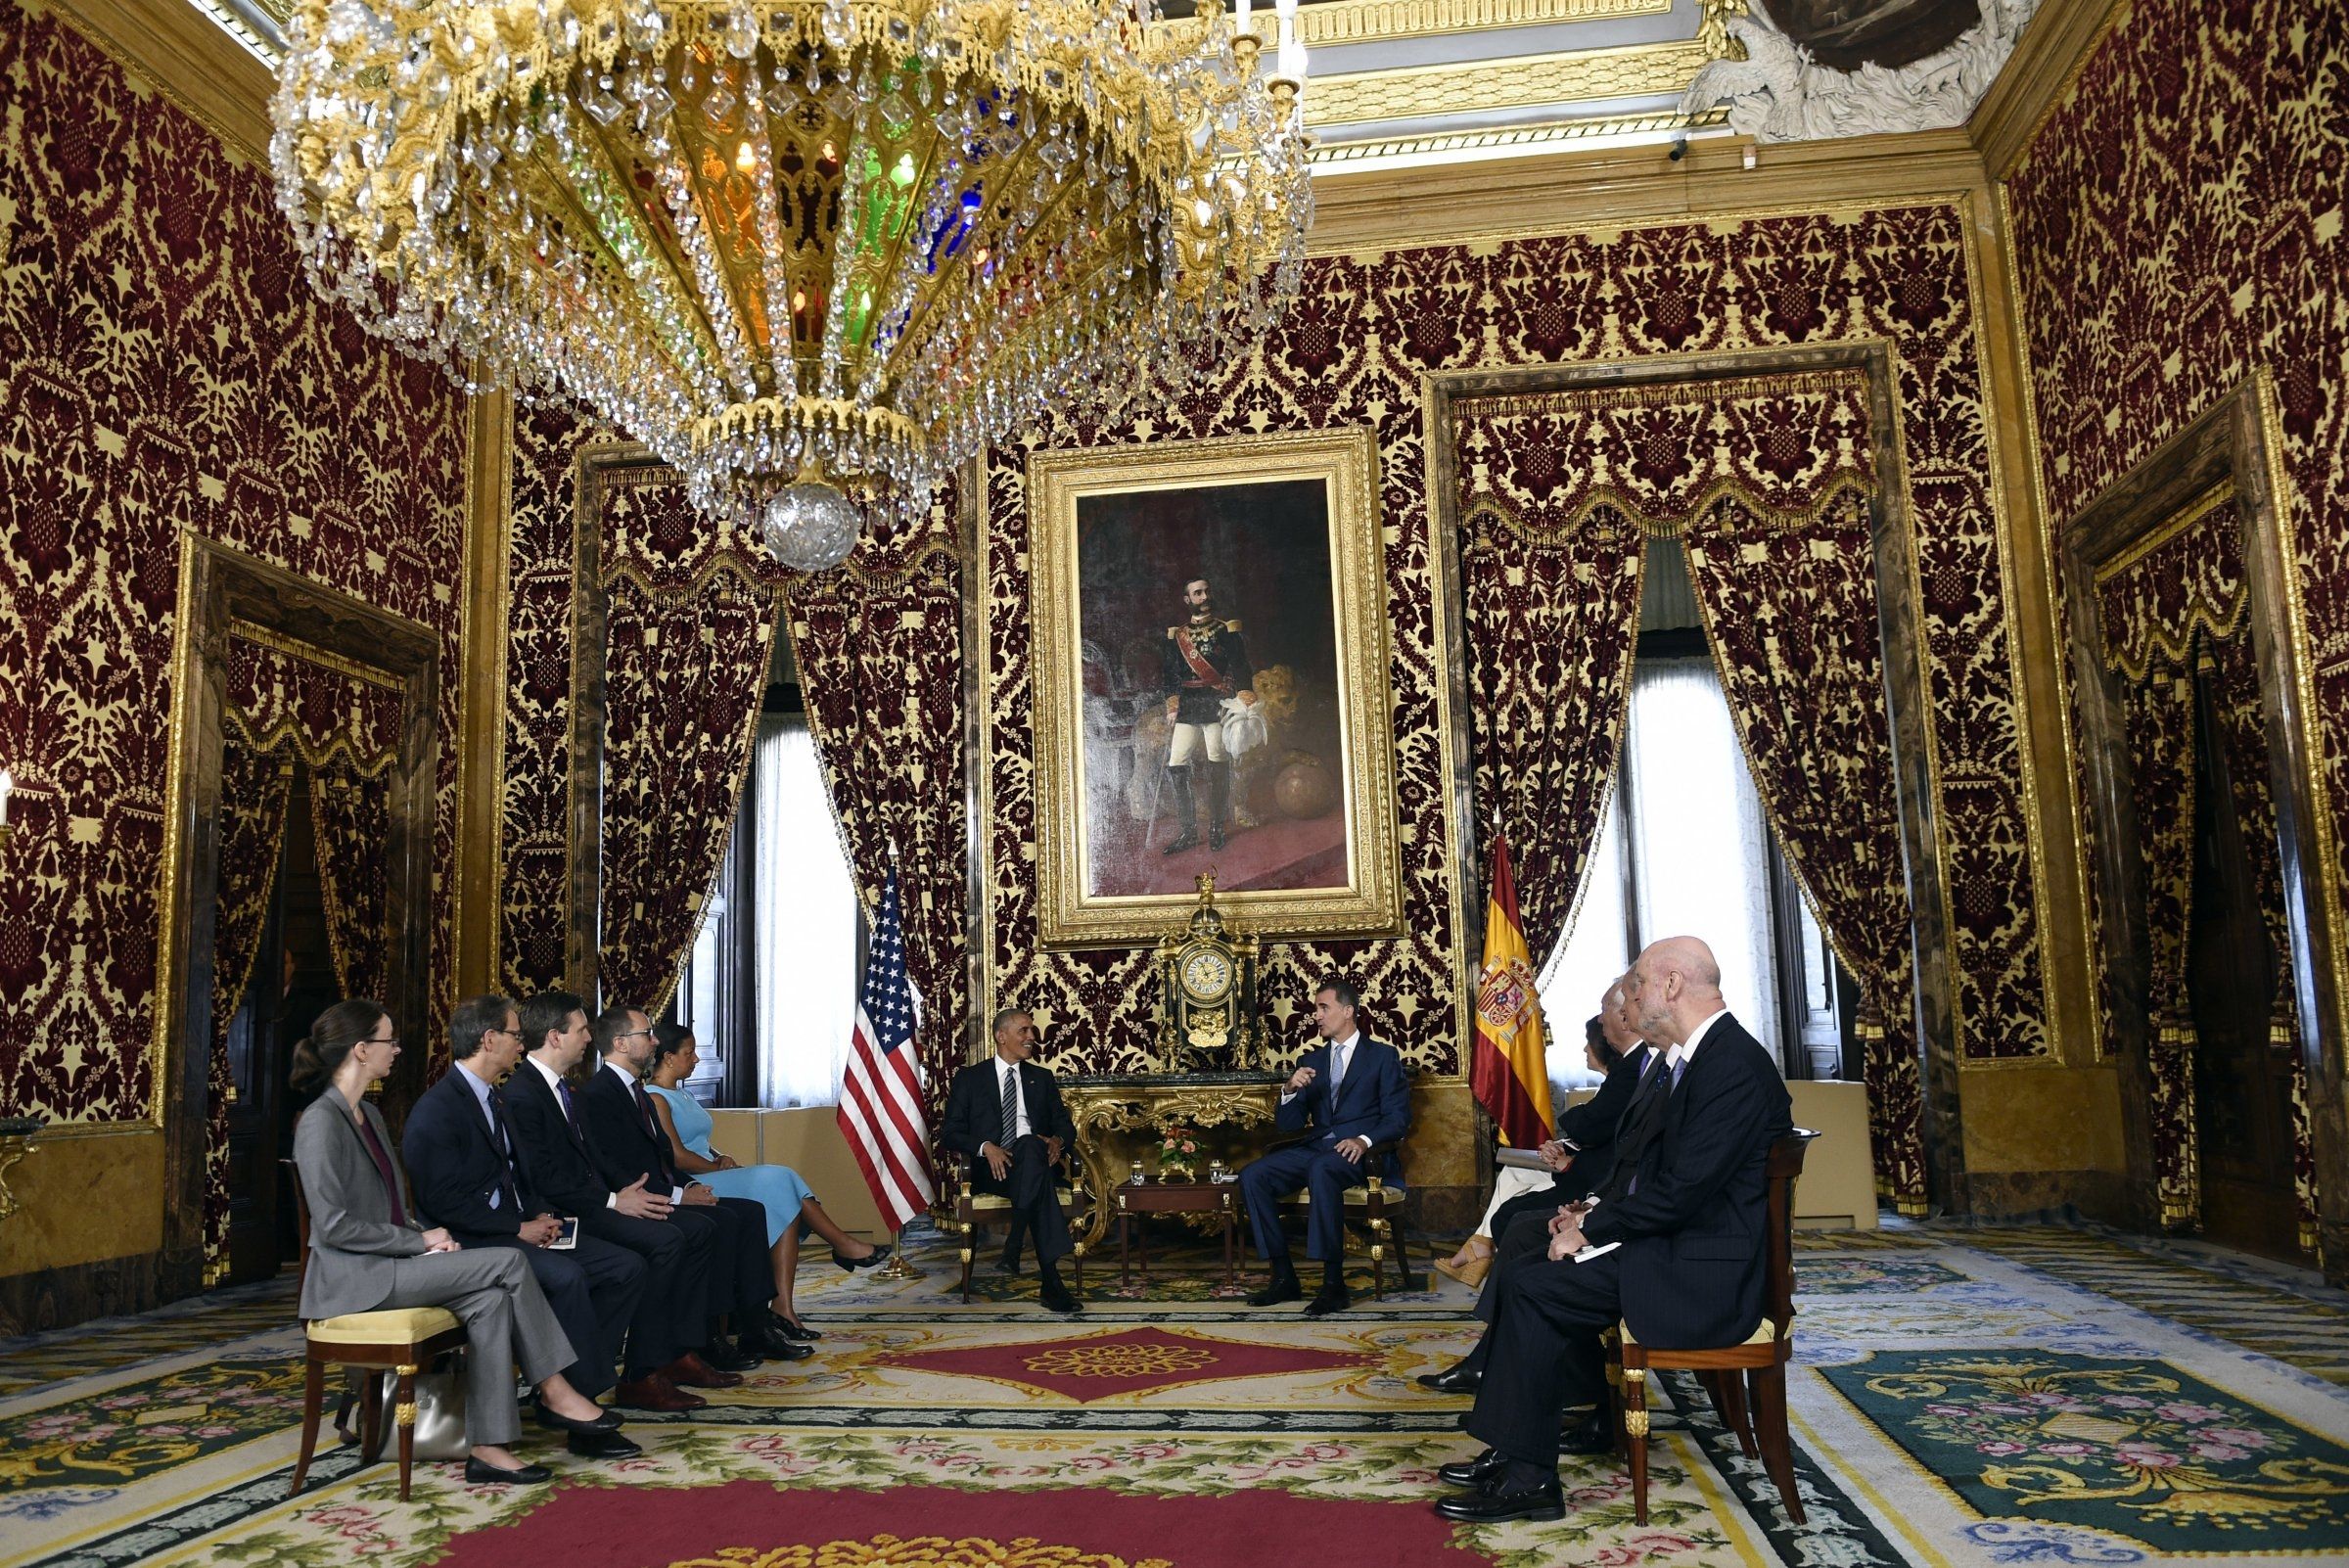 Massive Chandelier Hanging Above Obama And The King Of Spain Throughout Massive Chandelier (Photo 1 of 15)